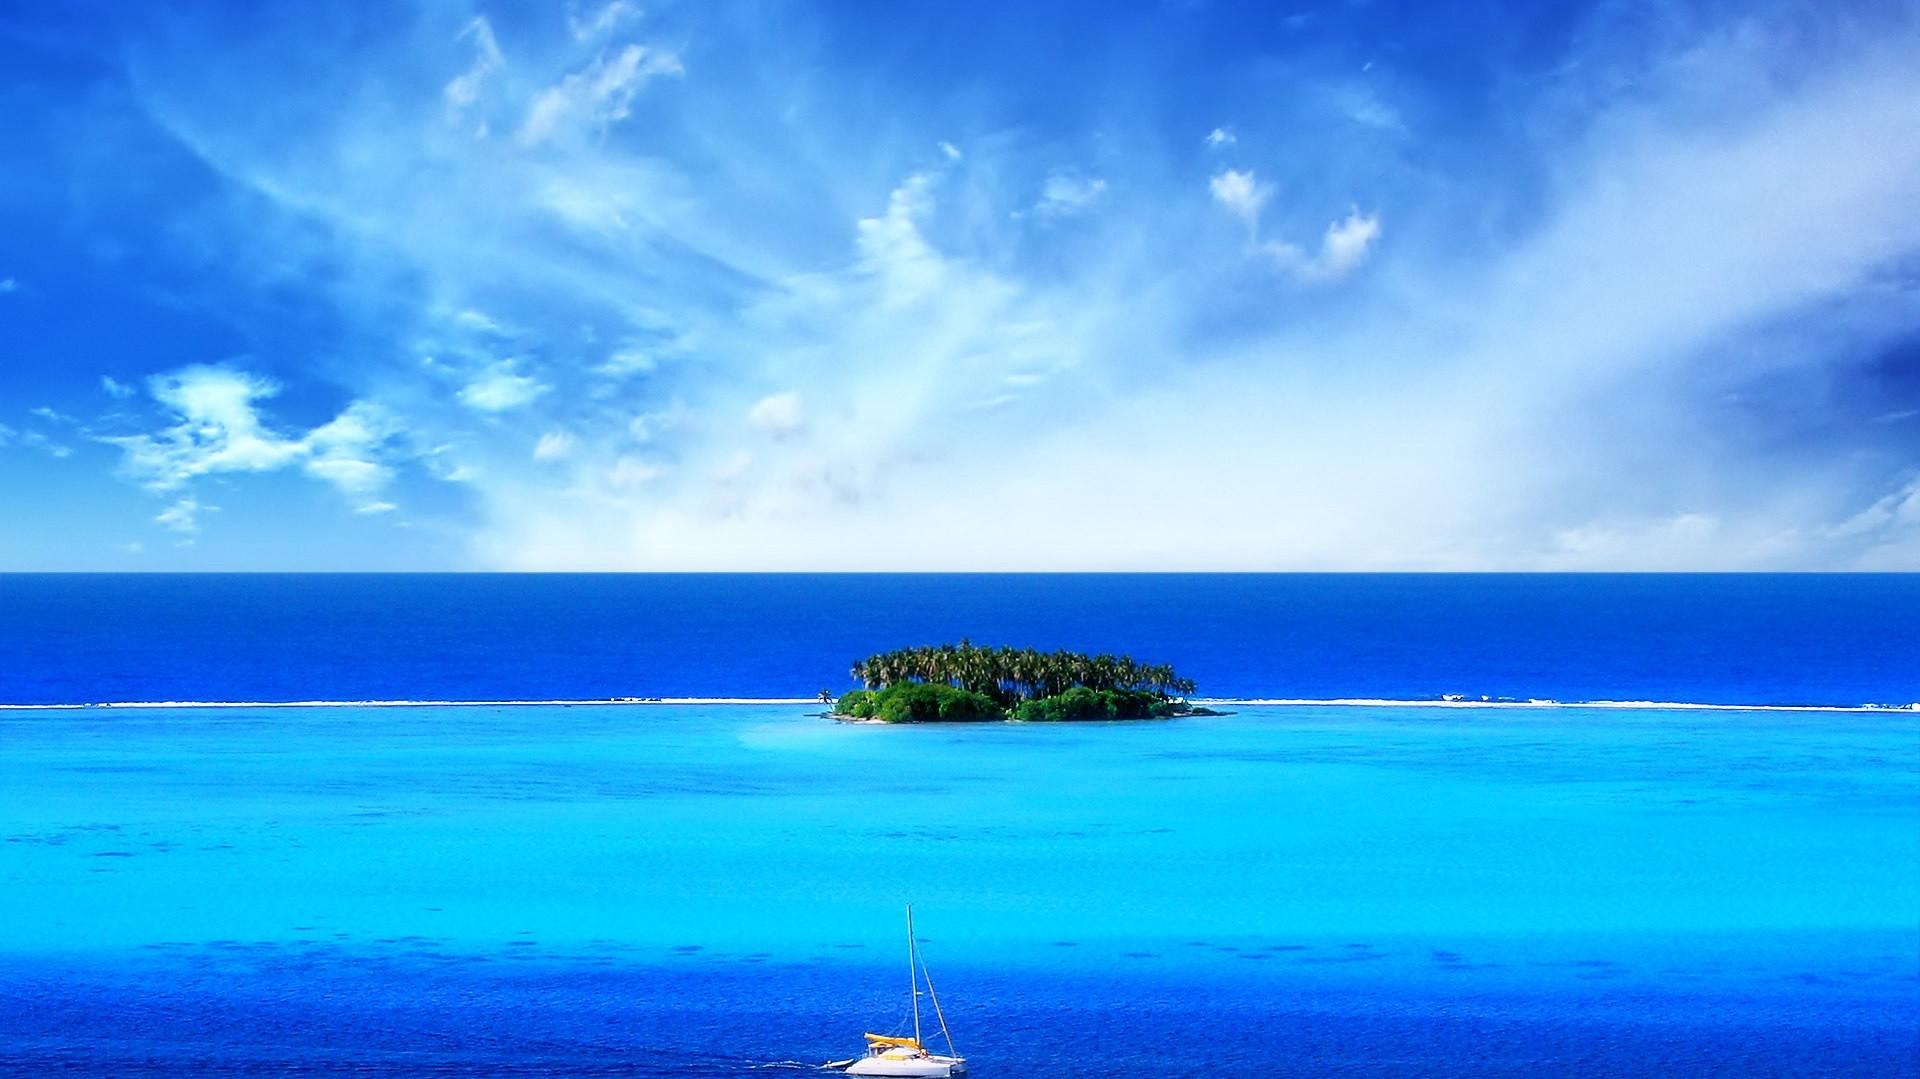 Summer Holiday Wonderful Blue Ocean Water And Small Island